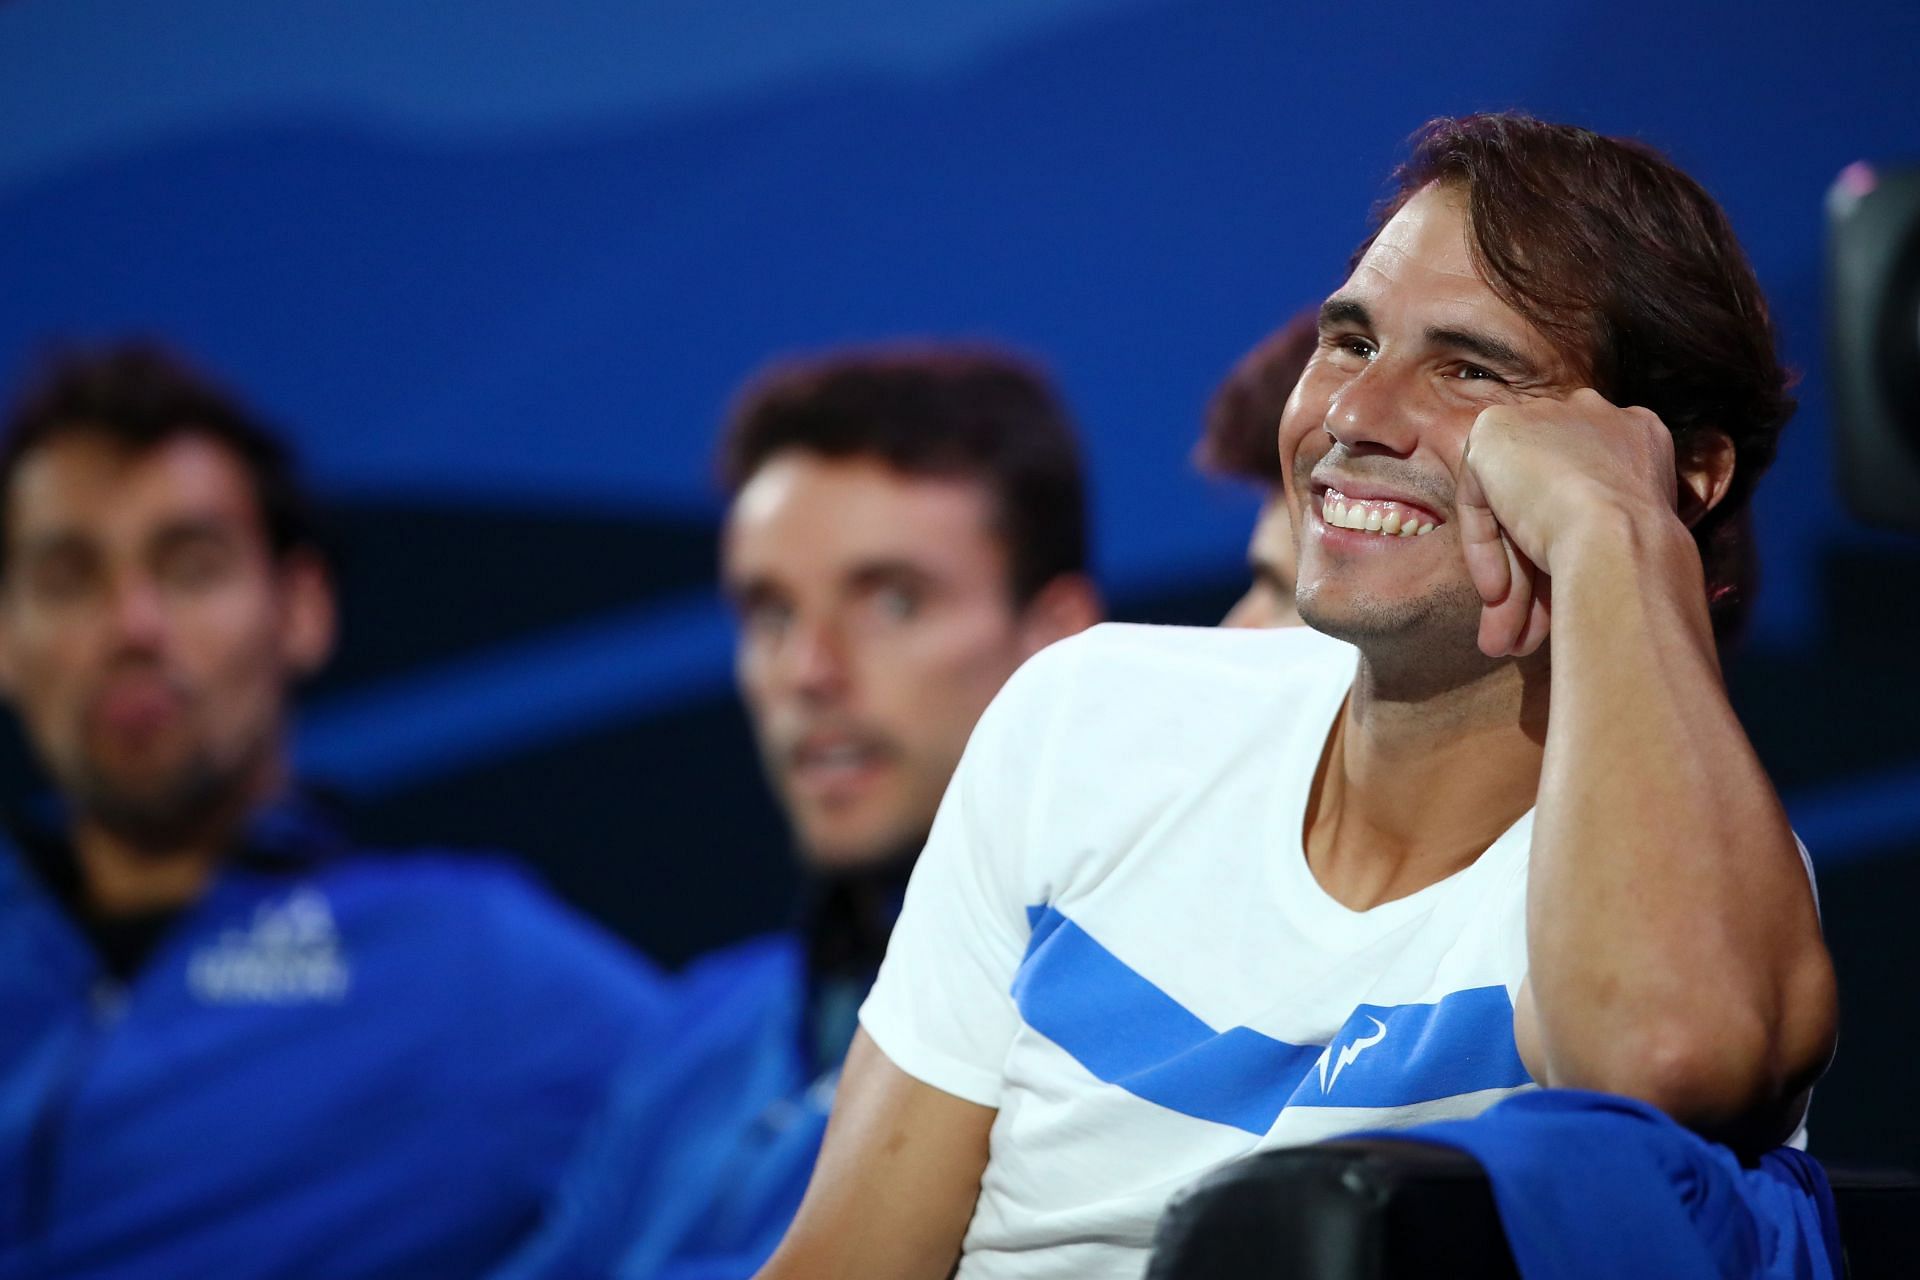 Rafael Nadal recently spoke about his recovery process